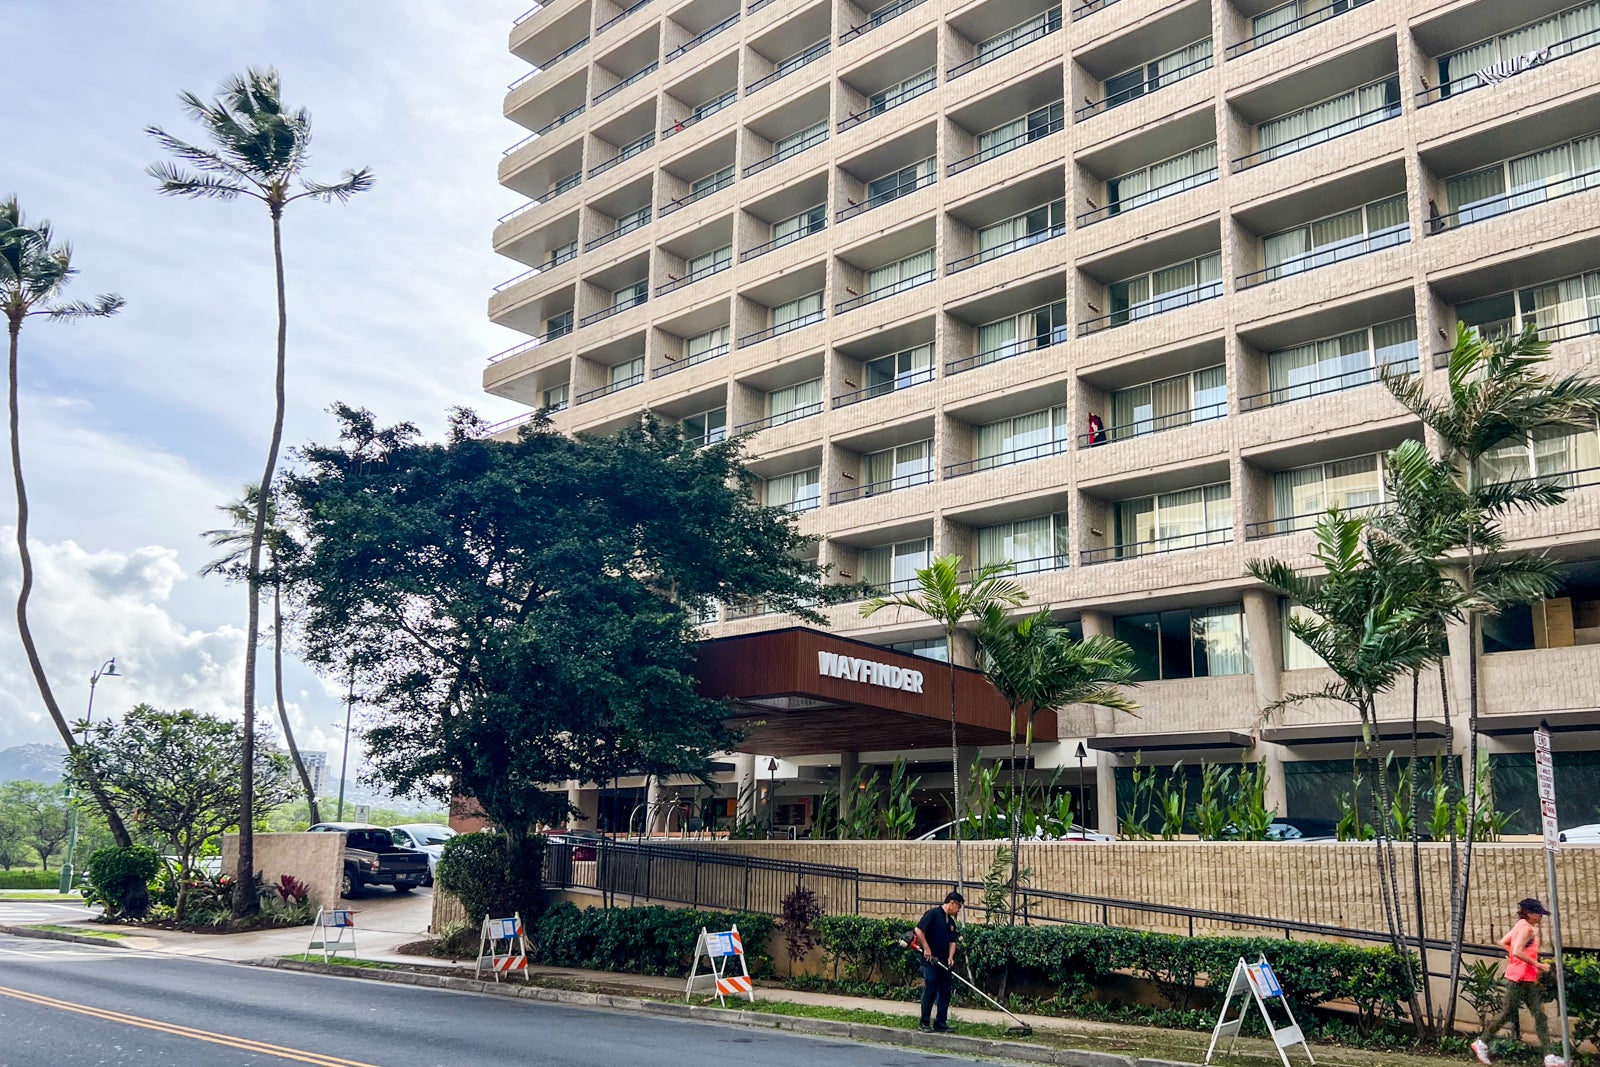 Meet the Wayfinder Waikiki, an affordable boutique hotel just blocks from the beach